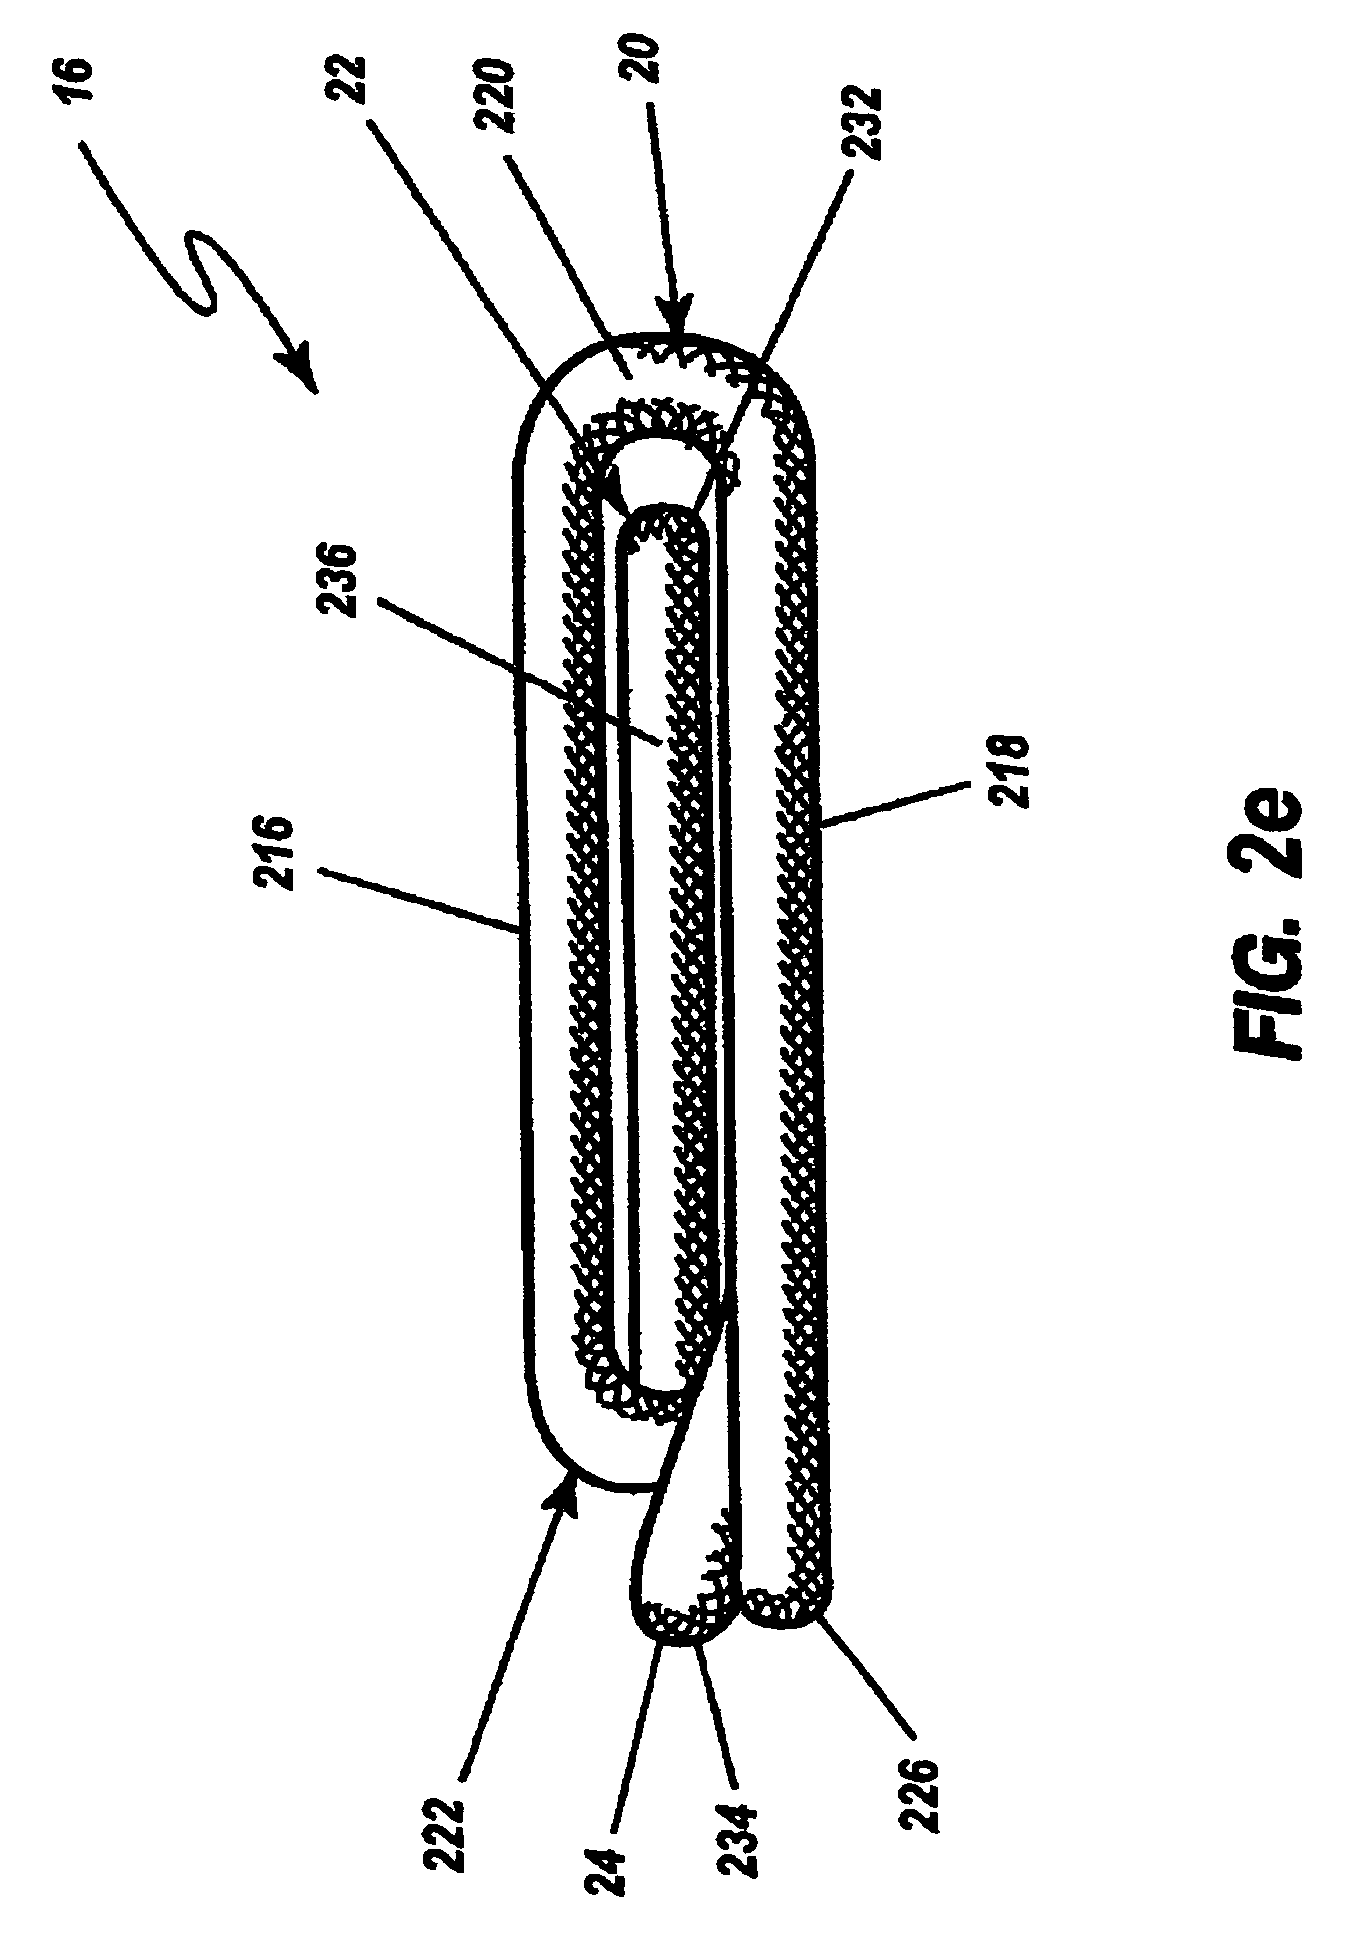 Surgical ligation clip and method for use thereof